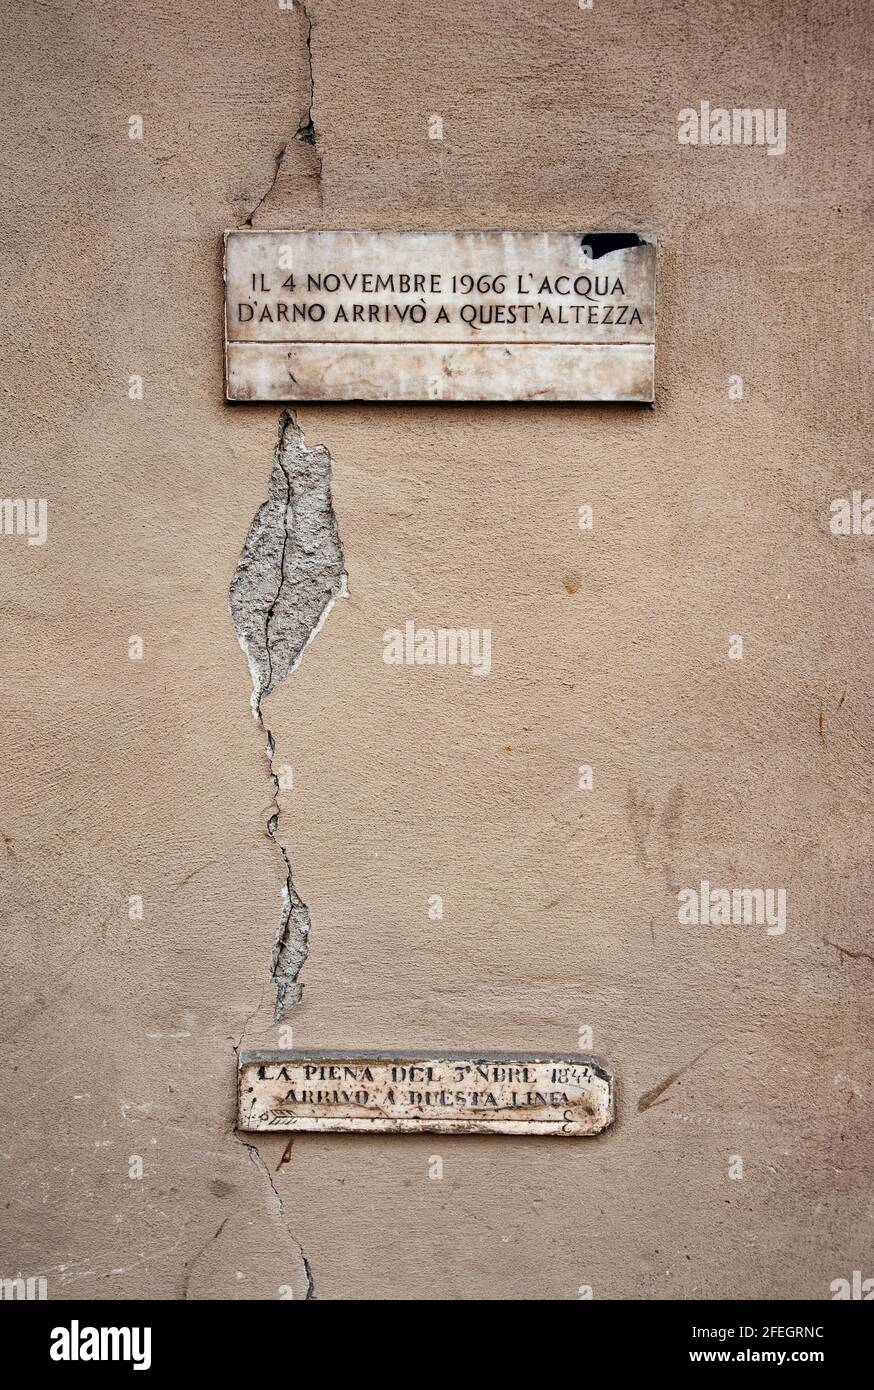 Memorial plaques commemorating the flood of the Arno in 1966, and the previous in 1844. Stock Photo